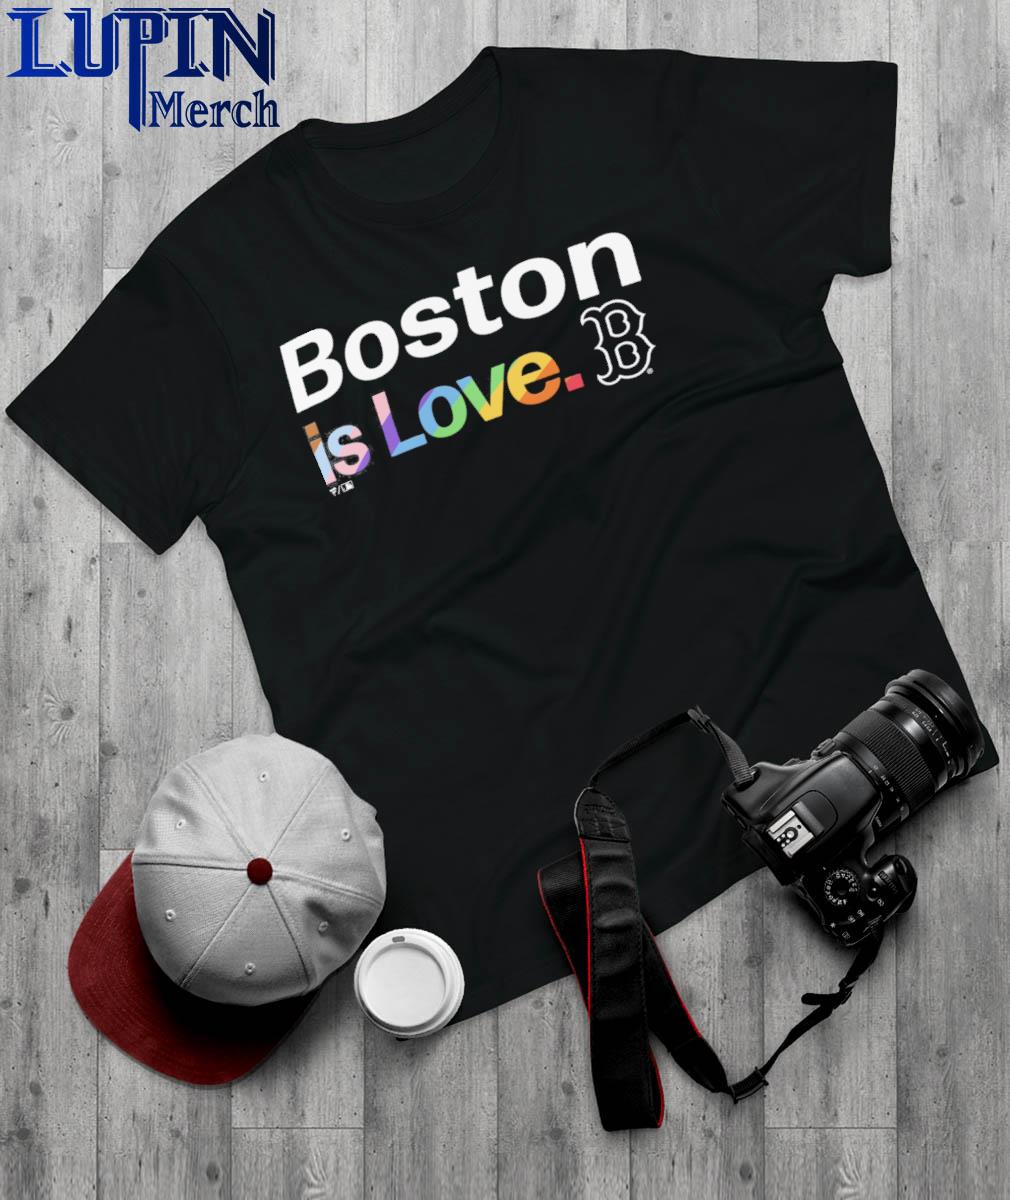 Official Boston Red Sox Is Love City Pride Shirt, hoodie, sweater